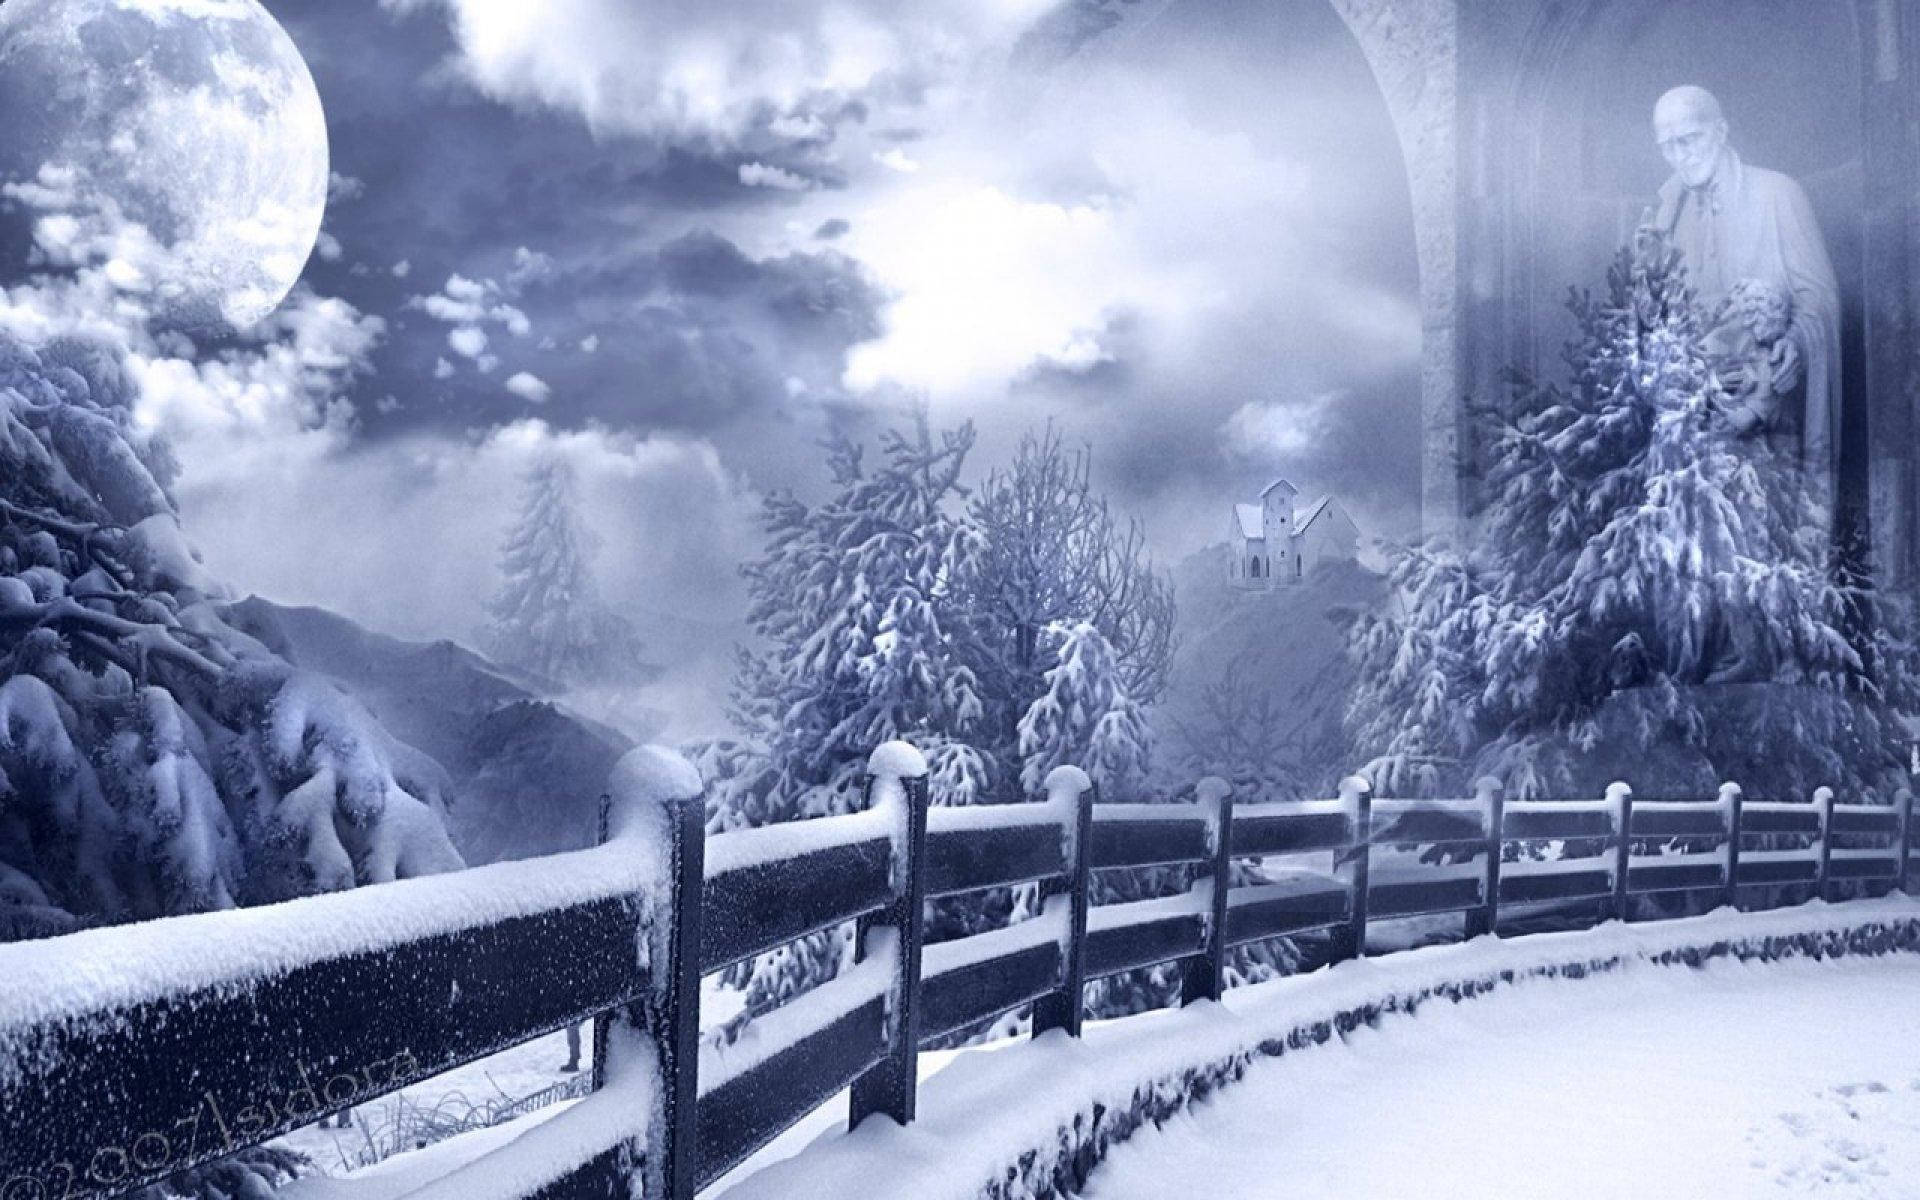 "Experience the beauty of a snowy winter with Snow Desktop" Wallpaper